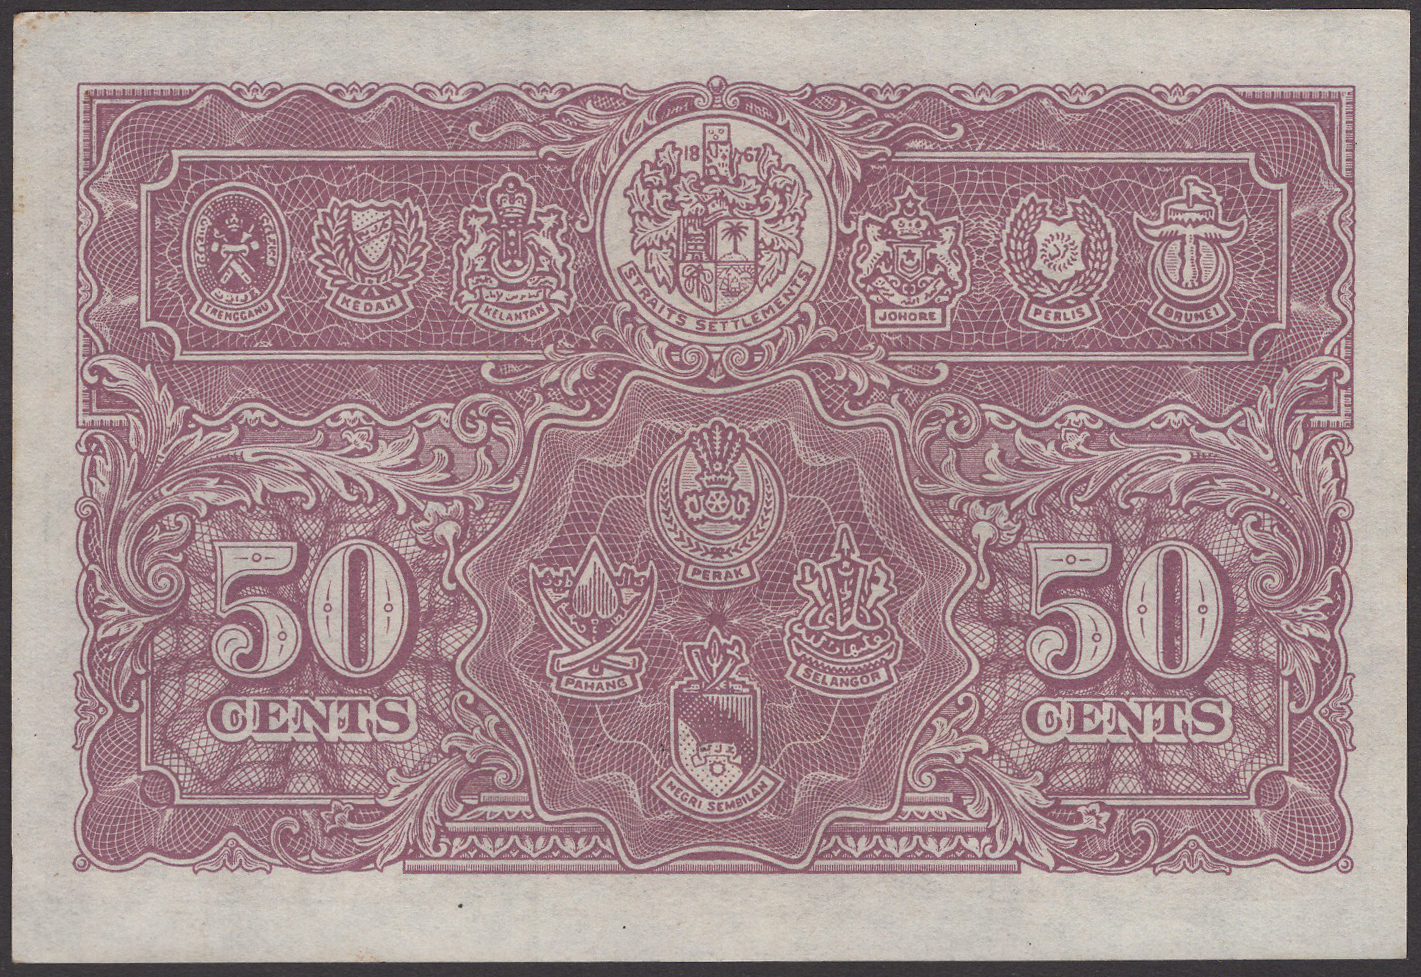 Board of Commissioners of Currency Malaya, 50 Cents, 1 July 1941, serial number A/32... - Image 2 of 2